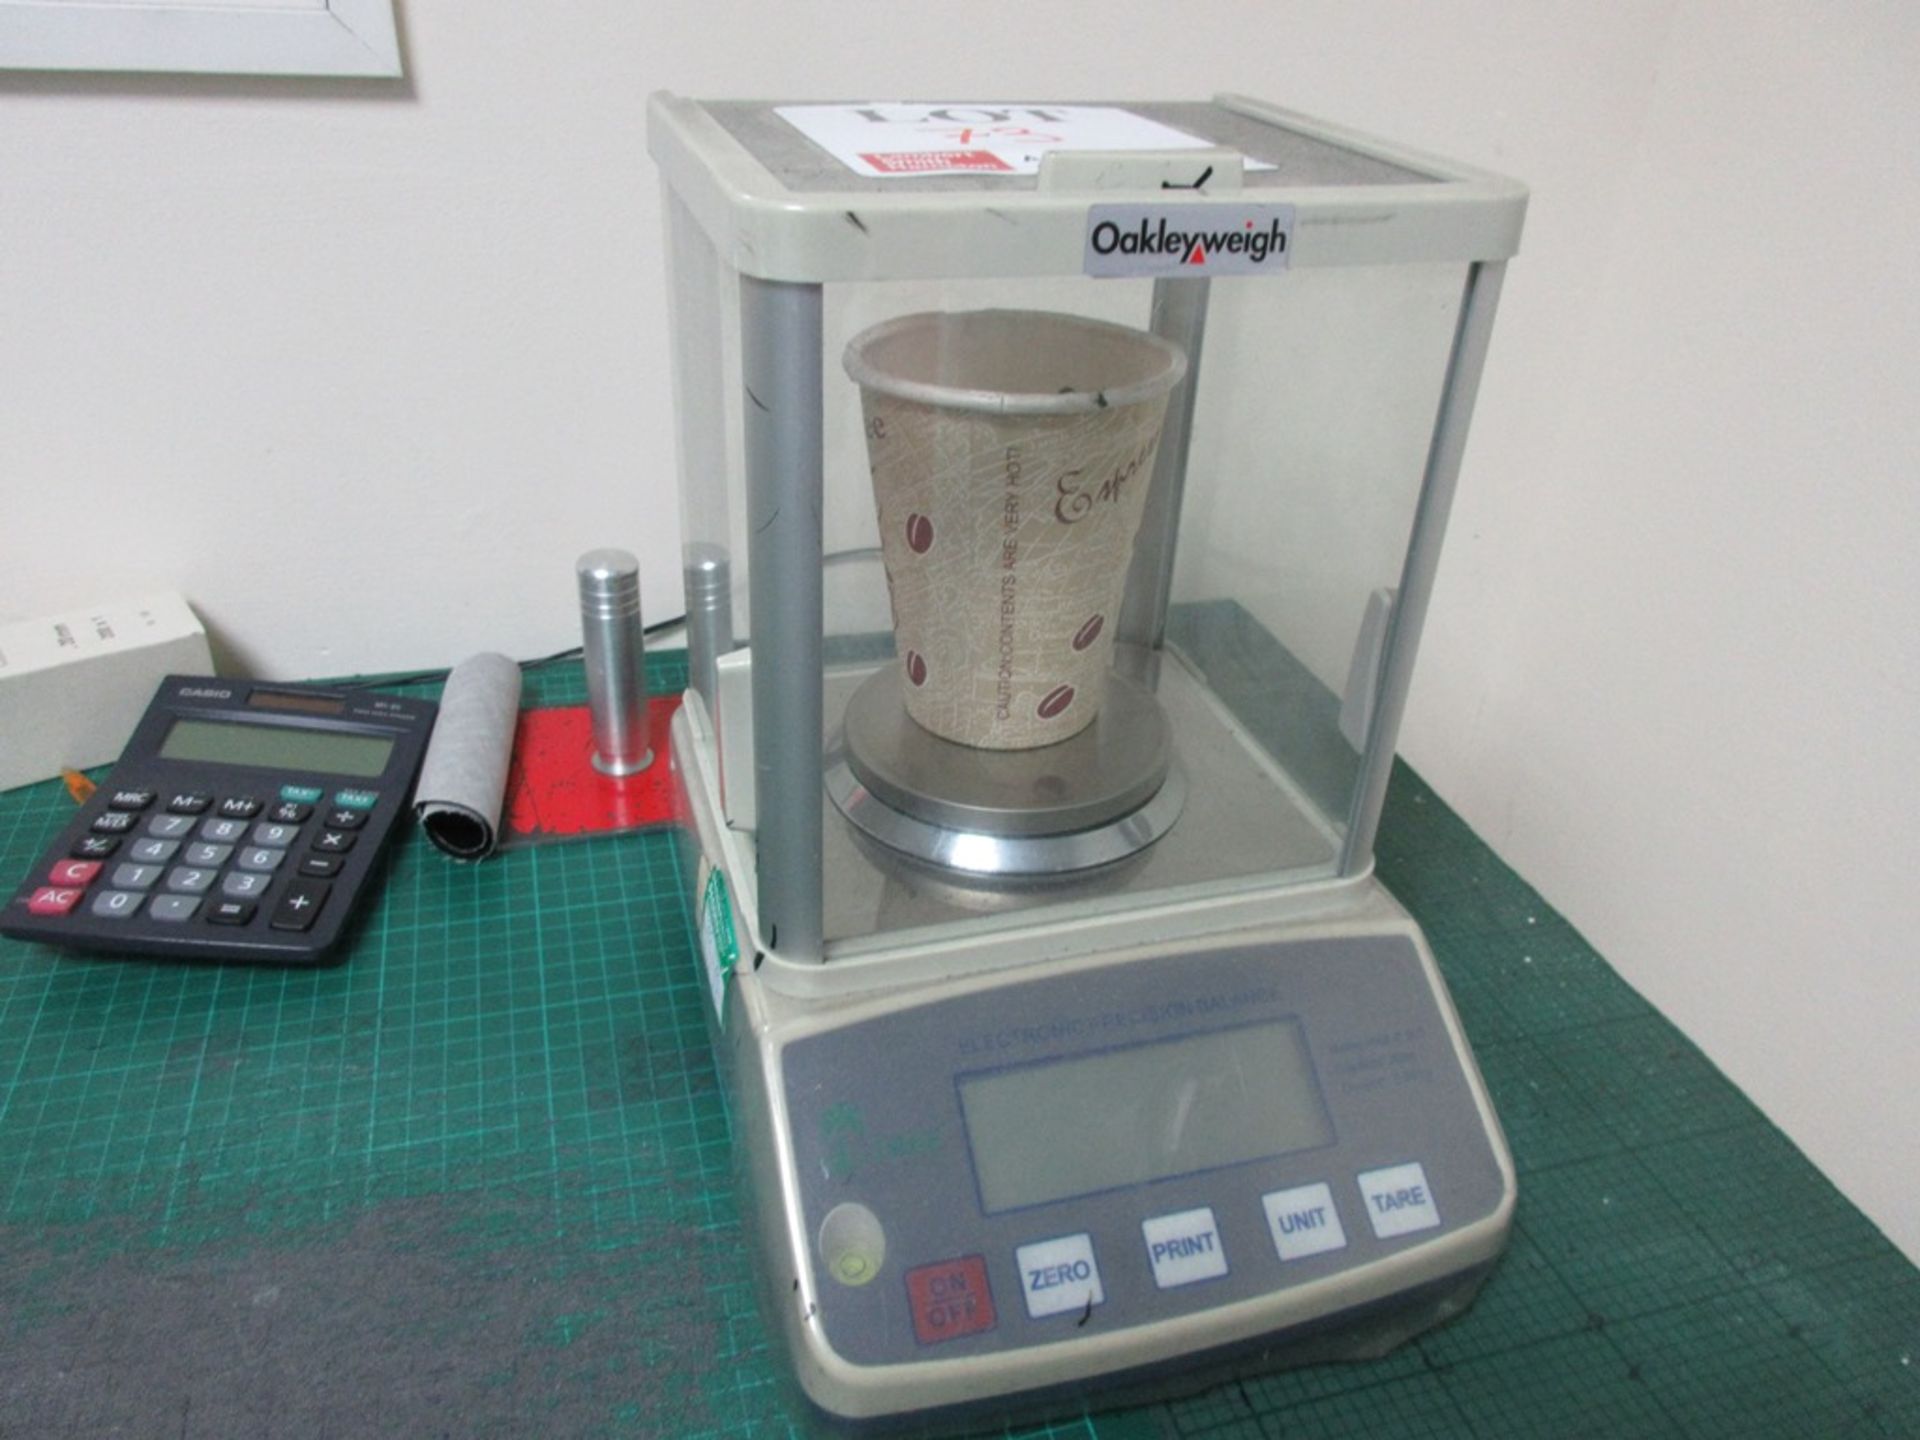 Tree benchtop electronic precision balance, model HRB-E-203, capacity 200g / division 0.001g